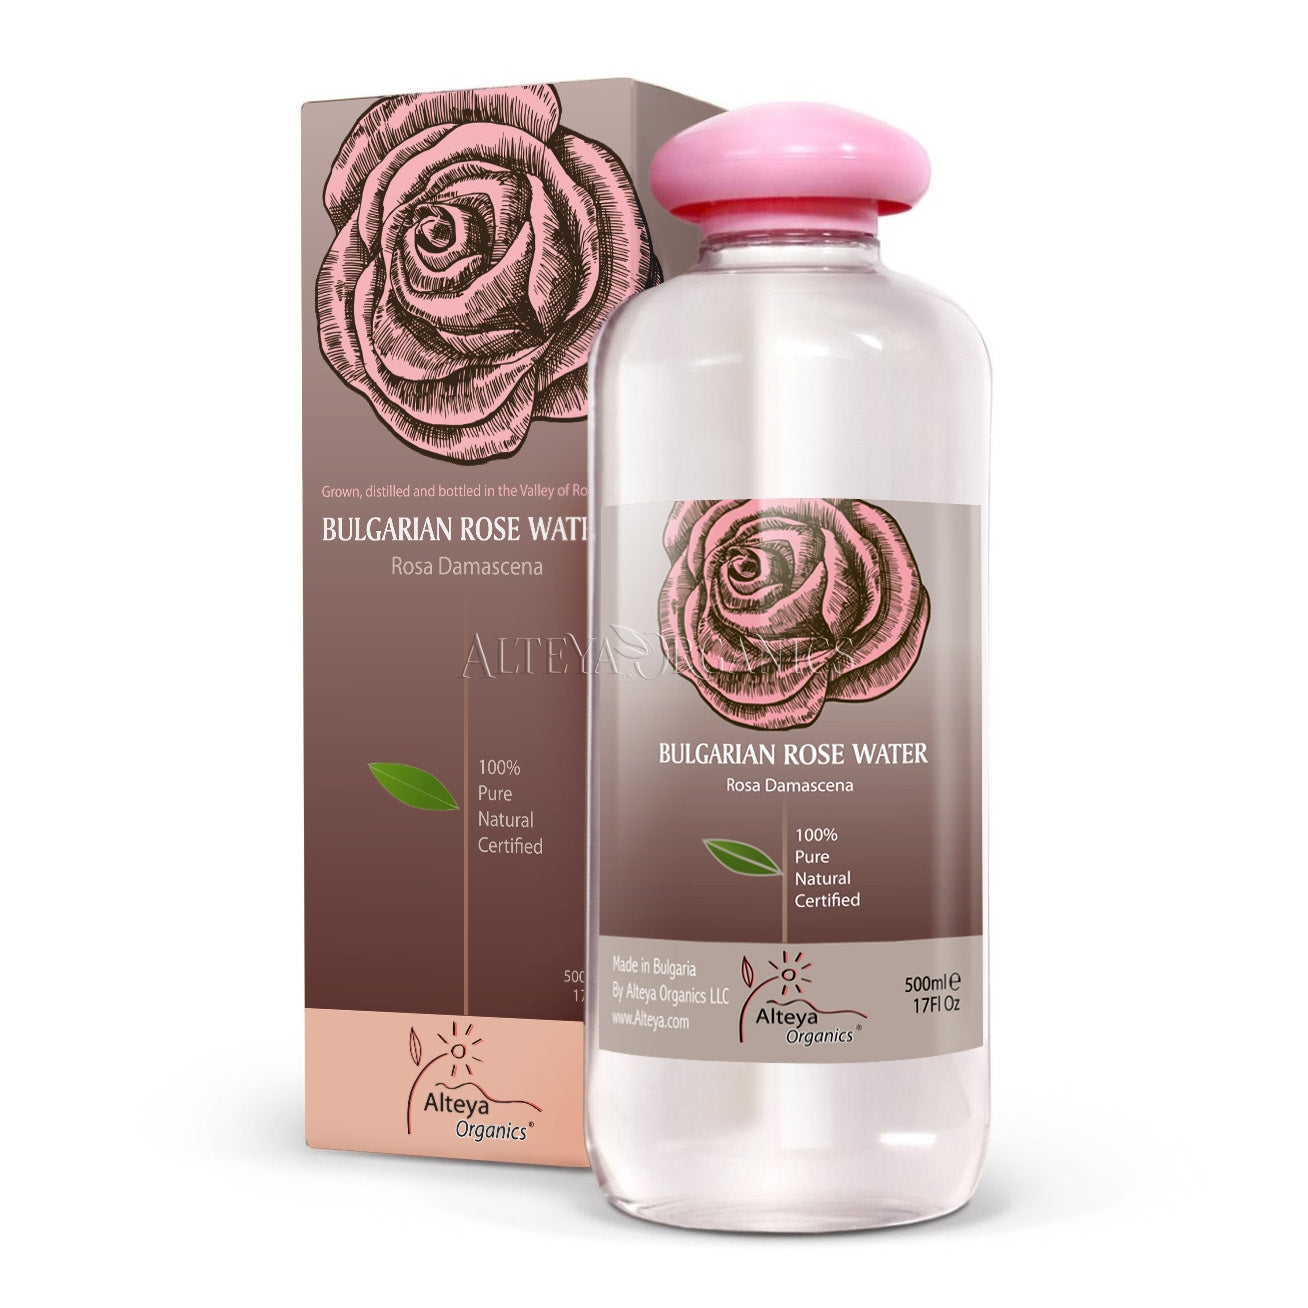 A bottle of Natural Bulgarian Rose Water - 500ml, a natural and pure product, in front of a box.